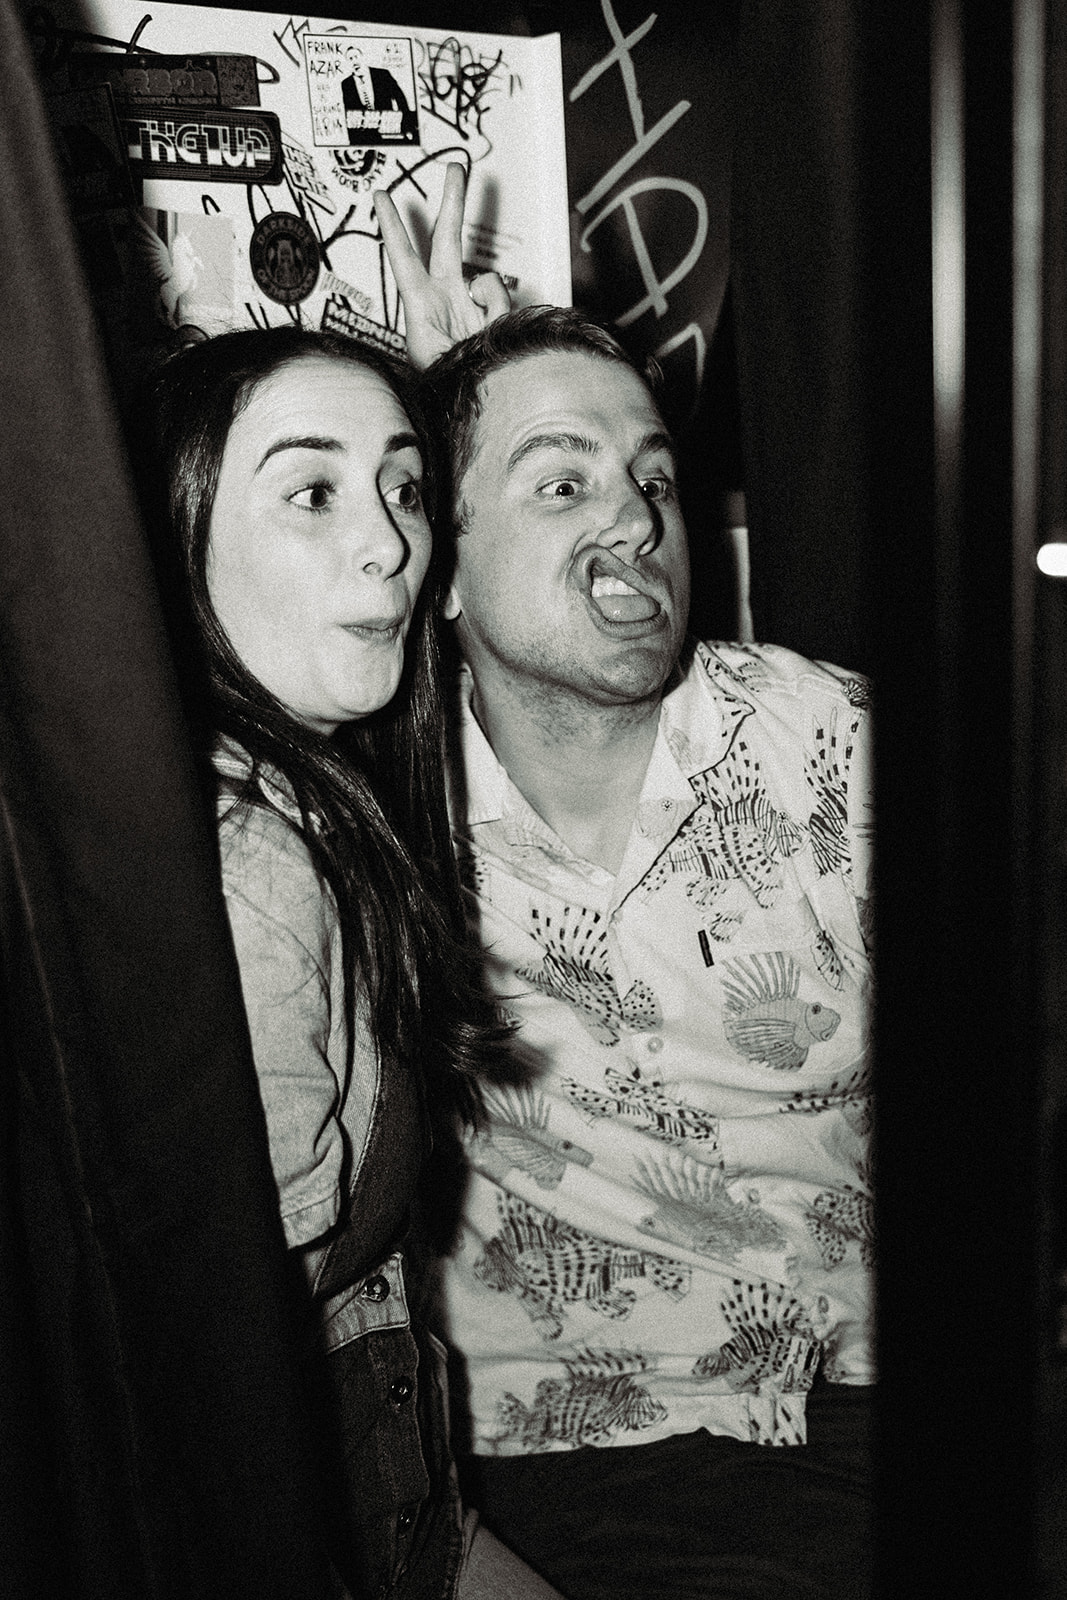 Engaged couple making silly faces for the arcade photo booth